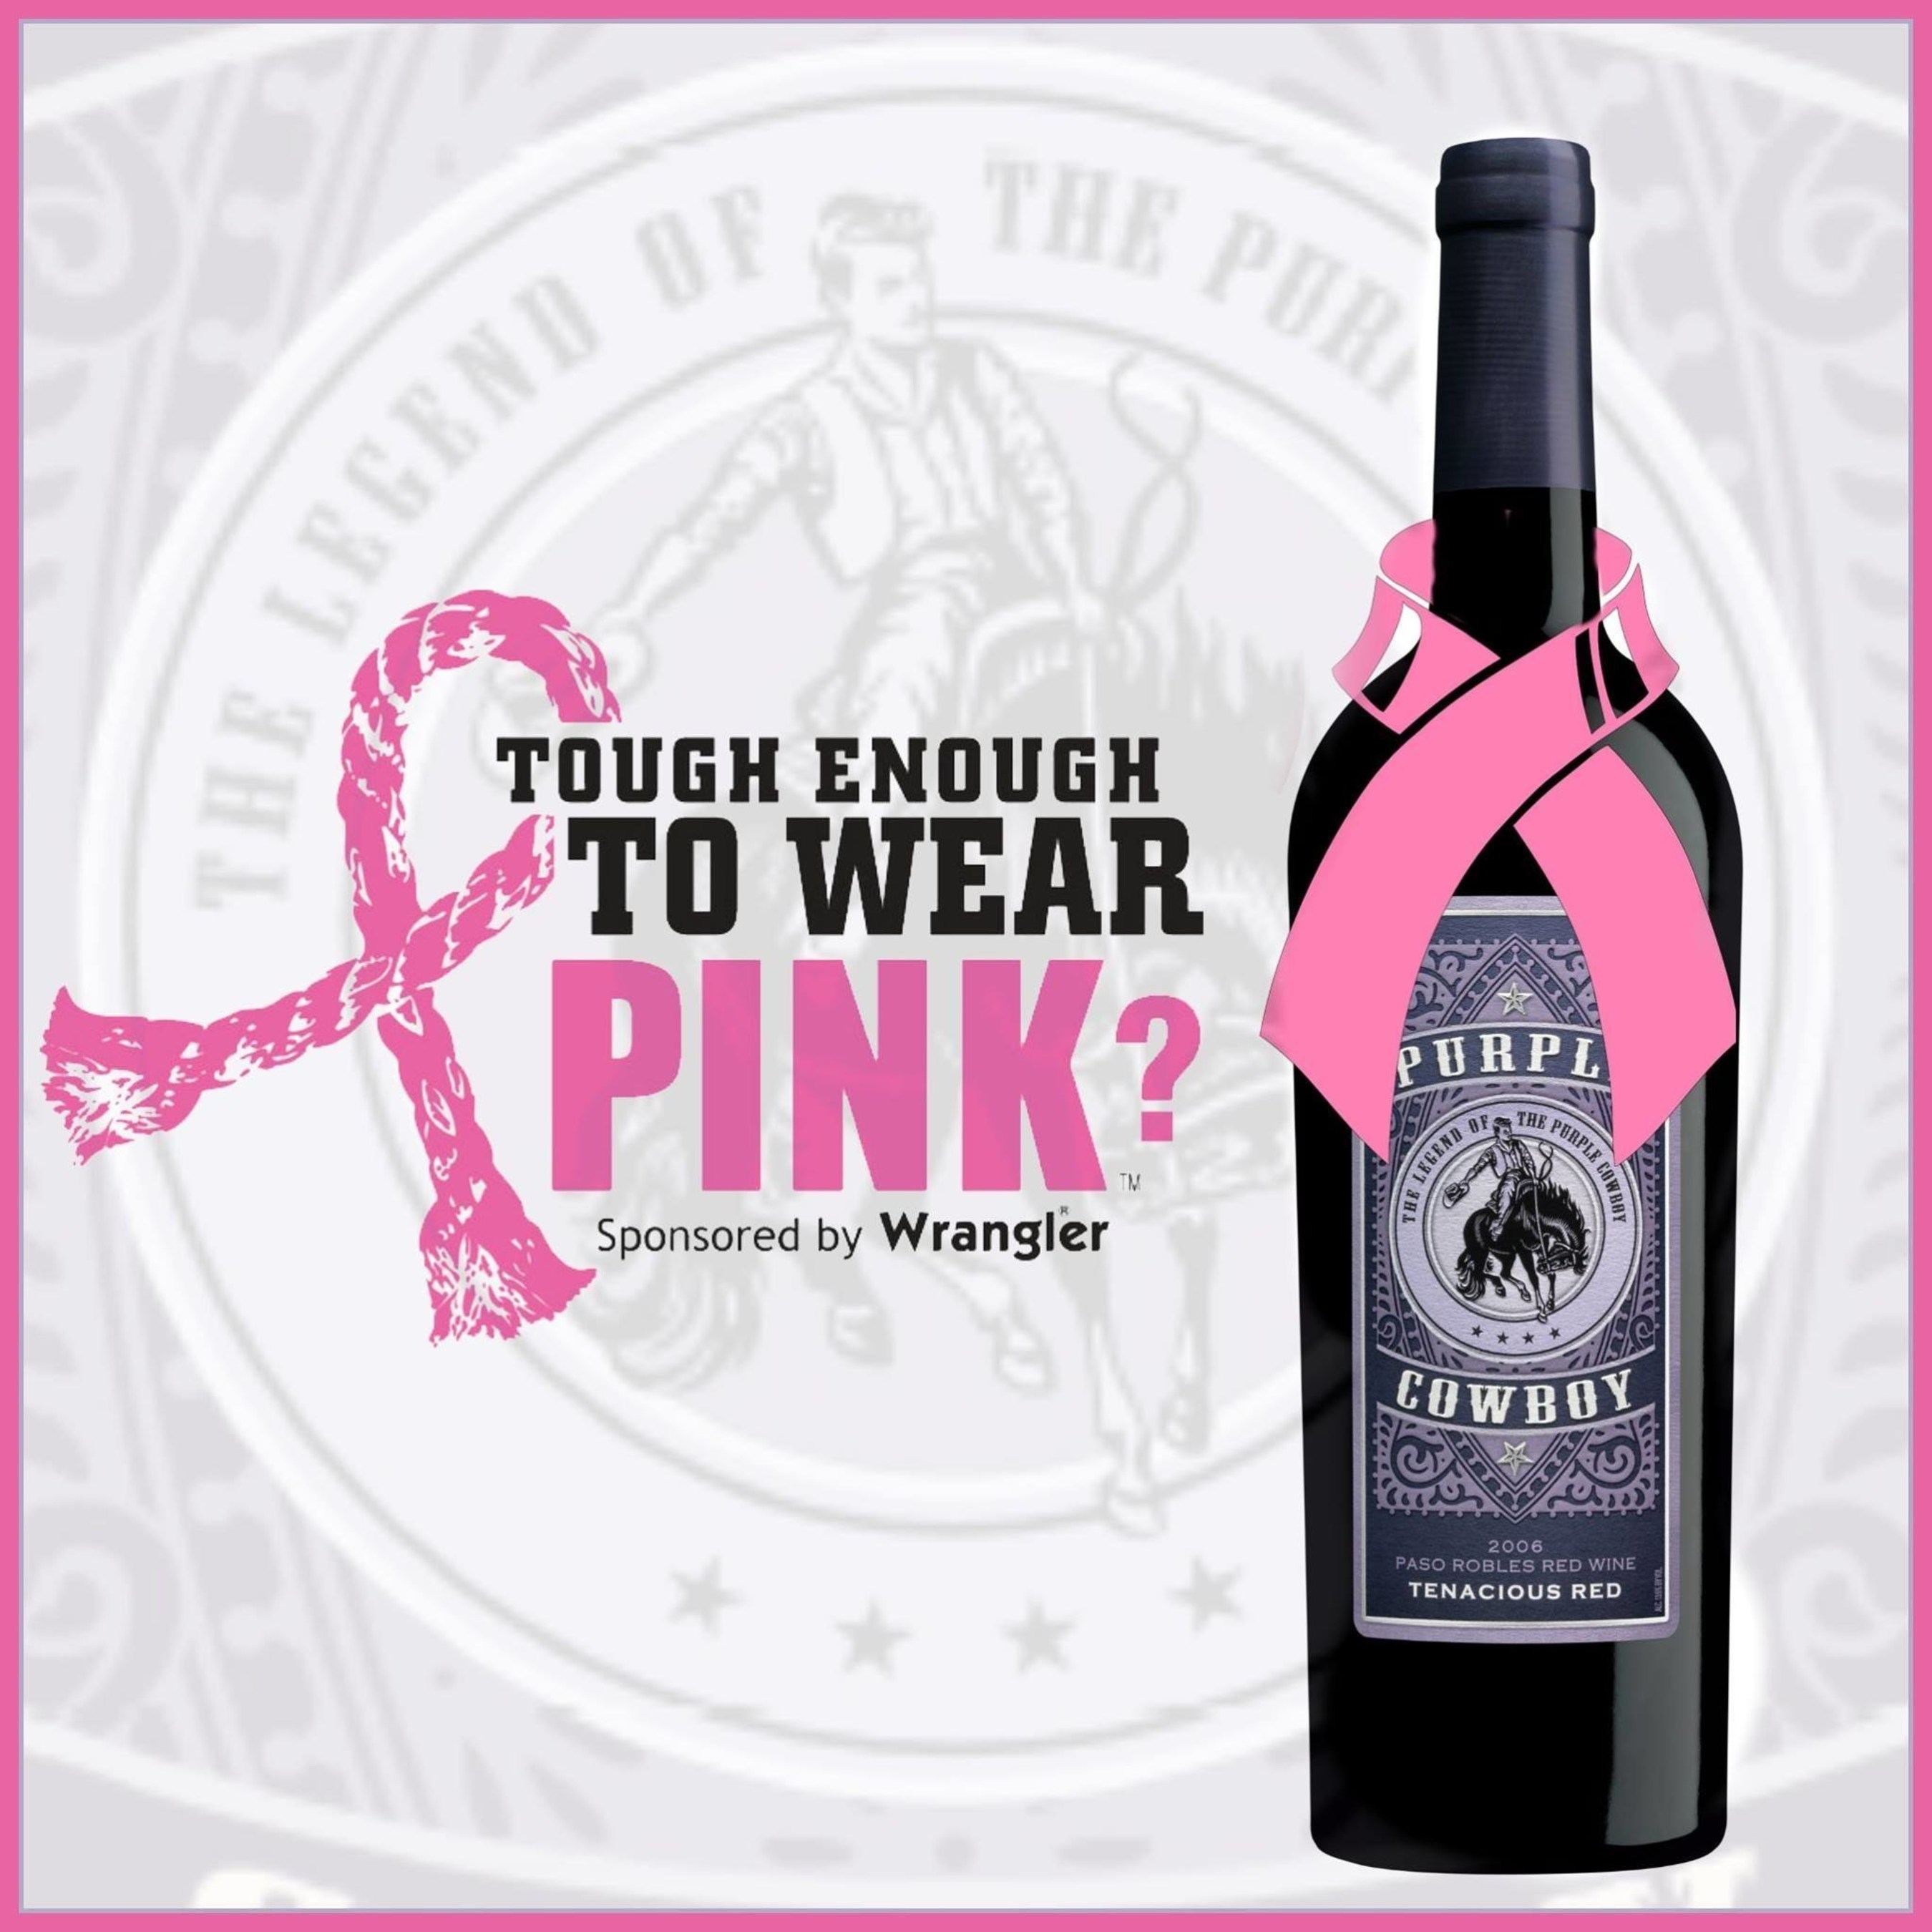 Purple Cowboy wines are proud to support Tough Enough To Wear Pink? and 11 years of raising awareness and funds in the fight against breast cancer.